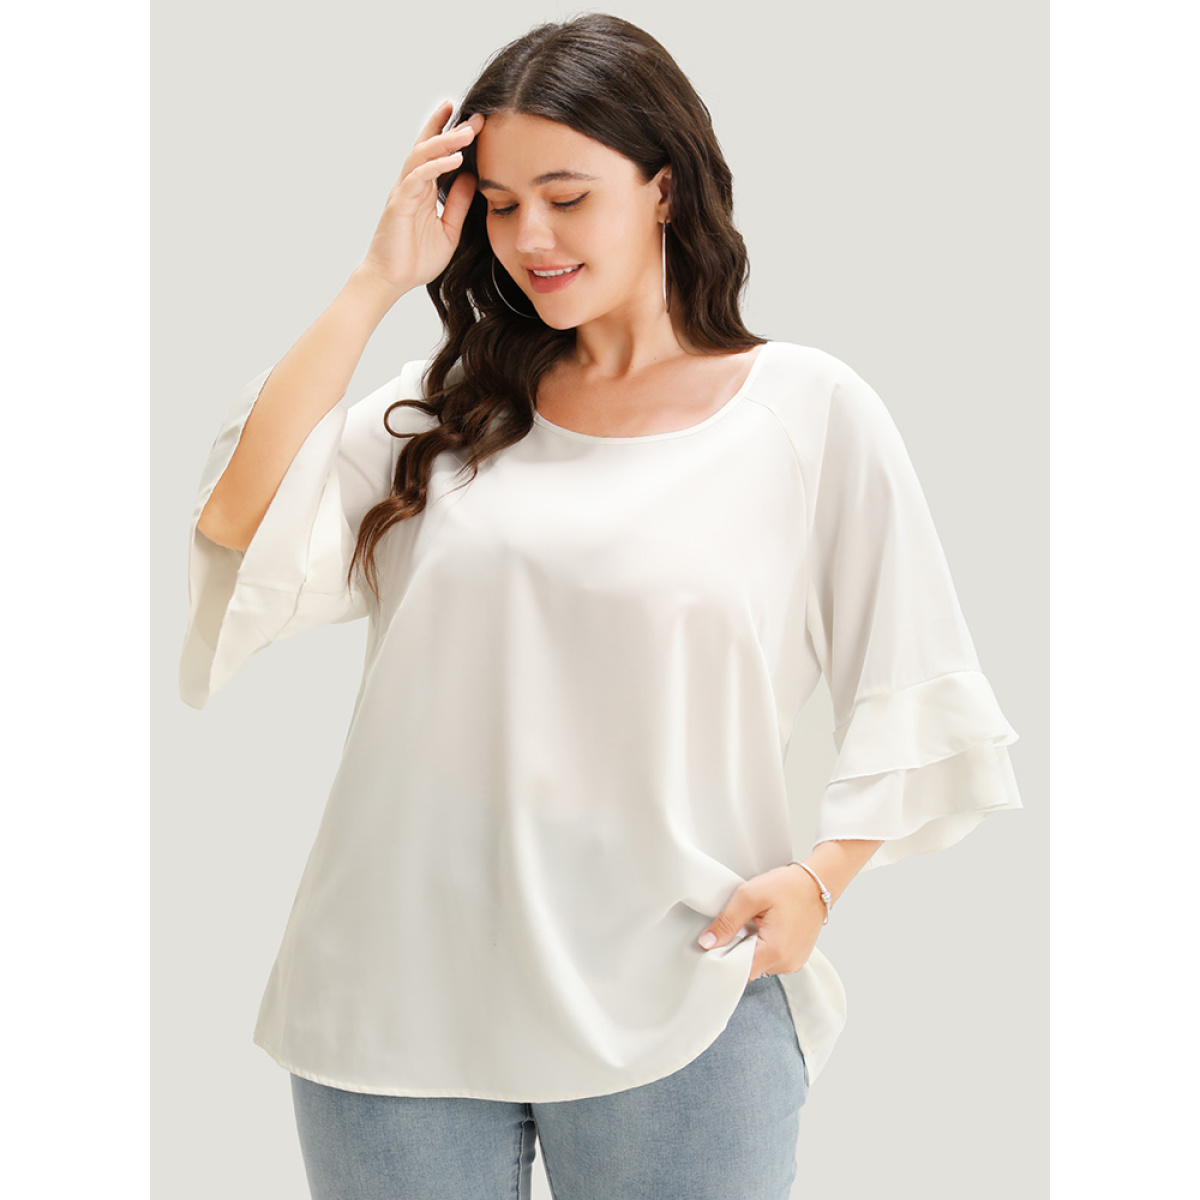 

Plus Size White Plain Ruffle Tiered Round Neck Blouse Women Work From Home Elbow-length sleeve Round Neck Work Blouses BloomChic